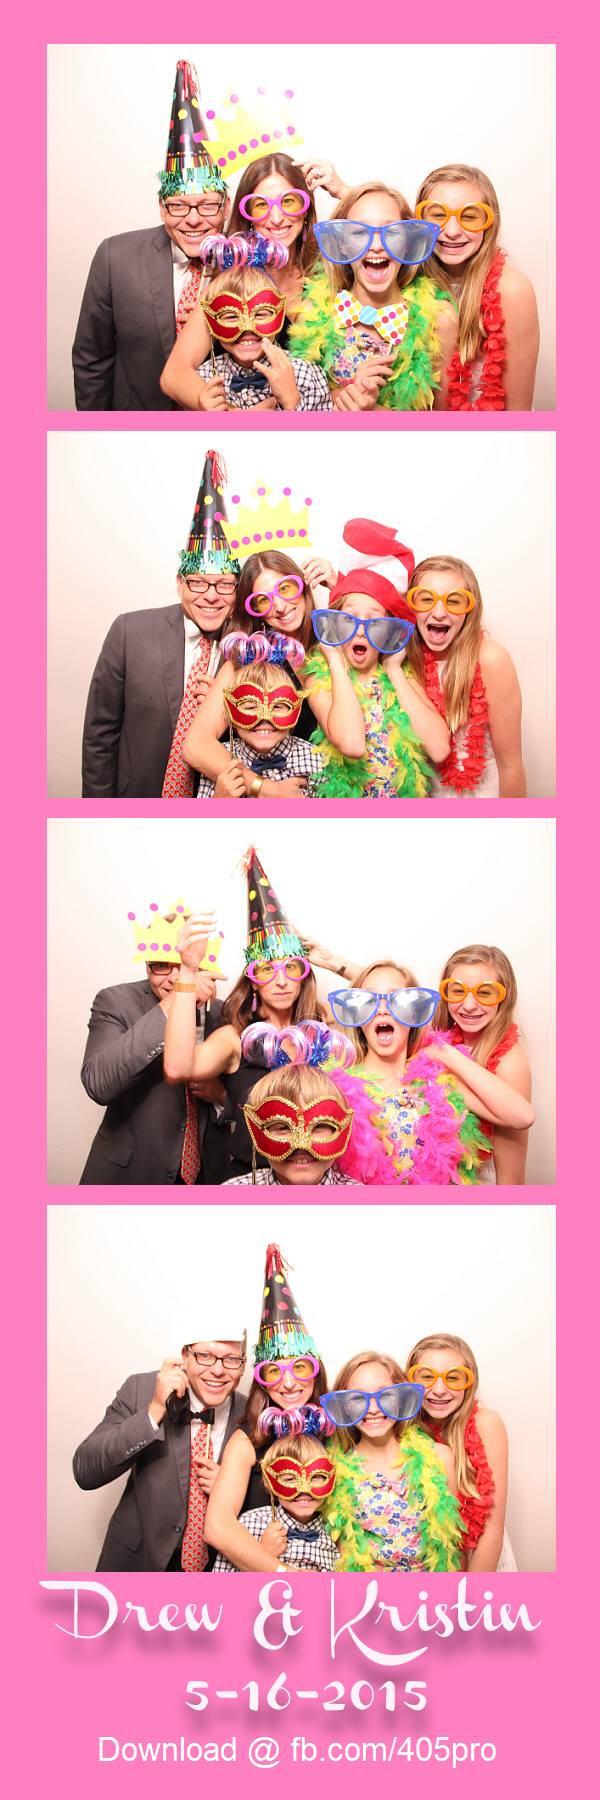 Edmond Photo Booth Rentals The Manor At Coffee Creek